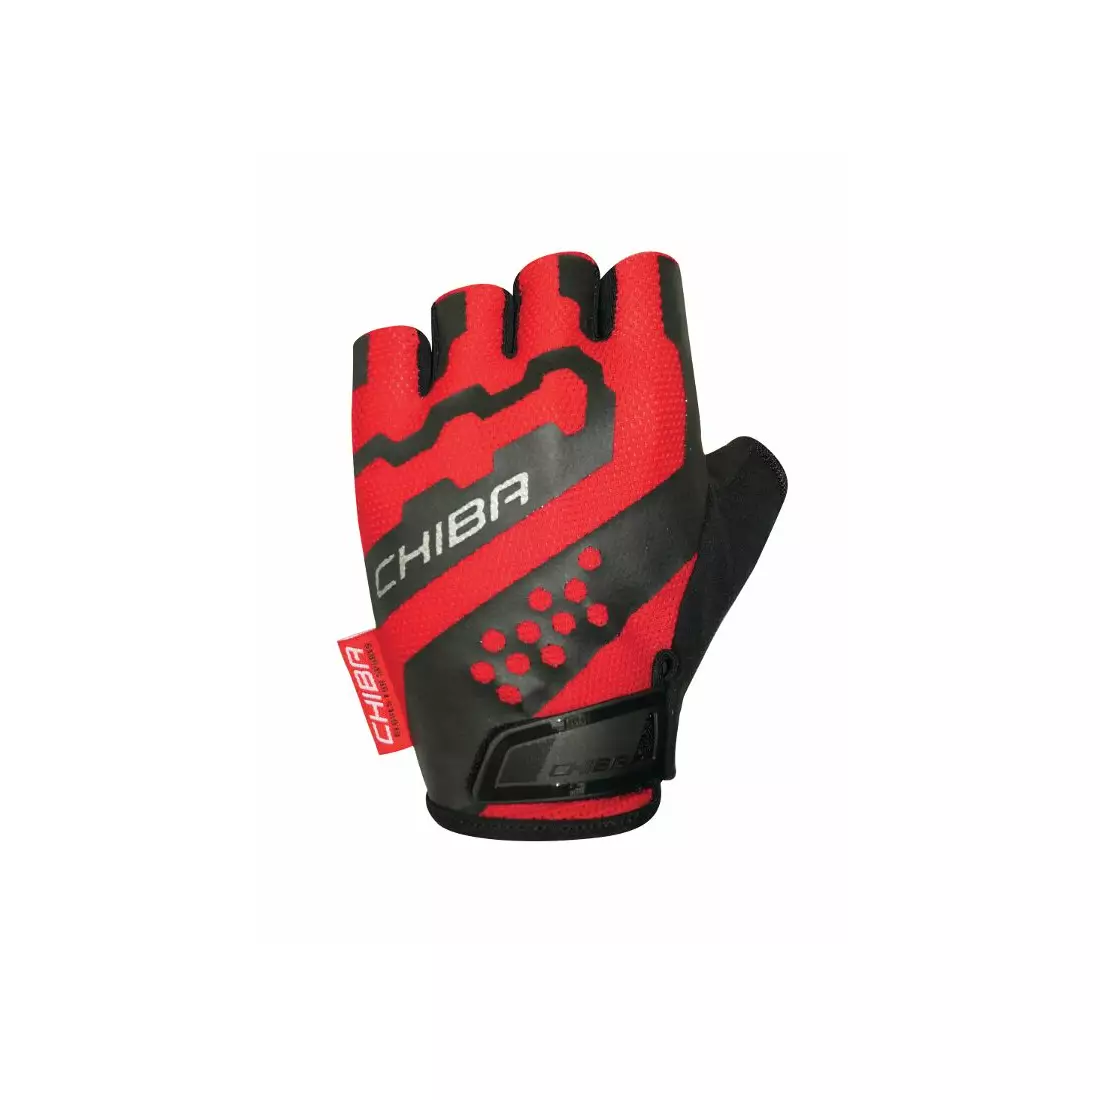 CHIBA PROFESSIONAL II cycling gloves red black 3040719